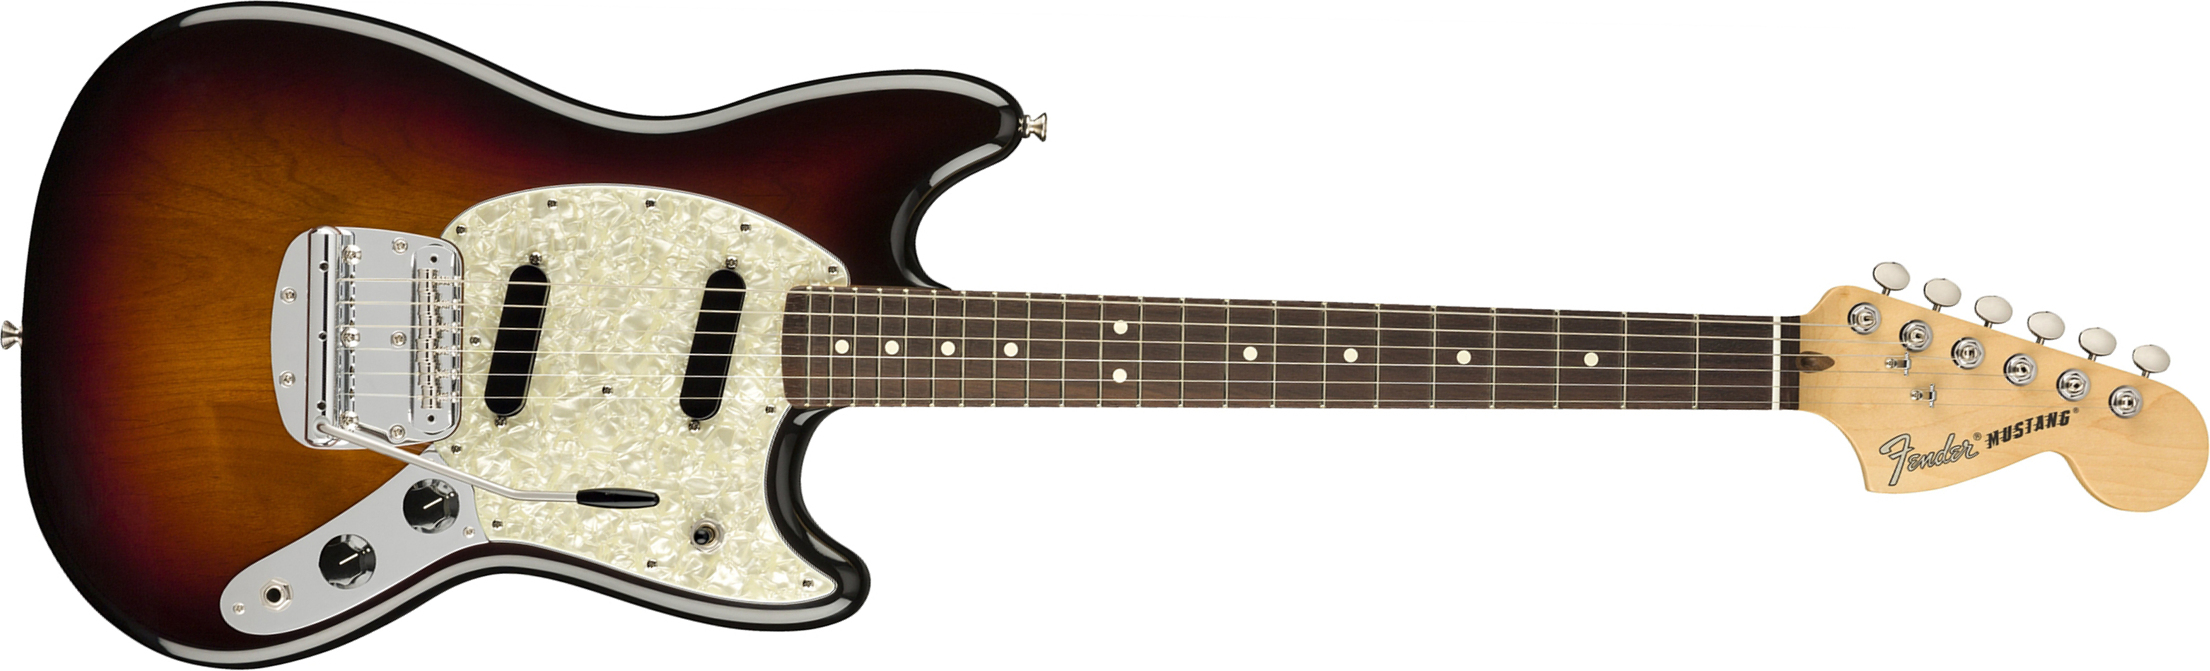 Fender Mustang American Performer Usa Ss Rw - 3-color Sunburst - Double cut electric guitar - Main picture